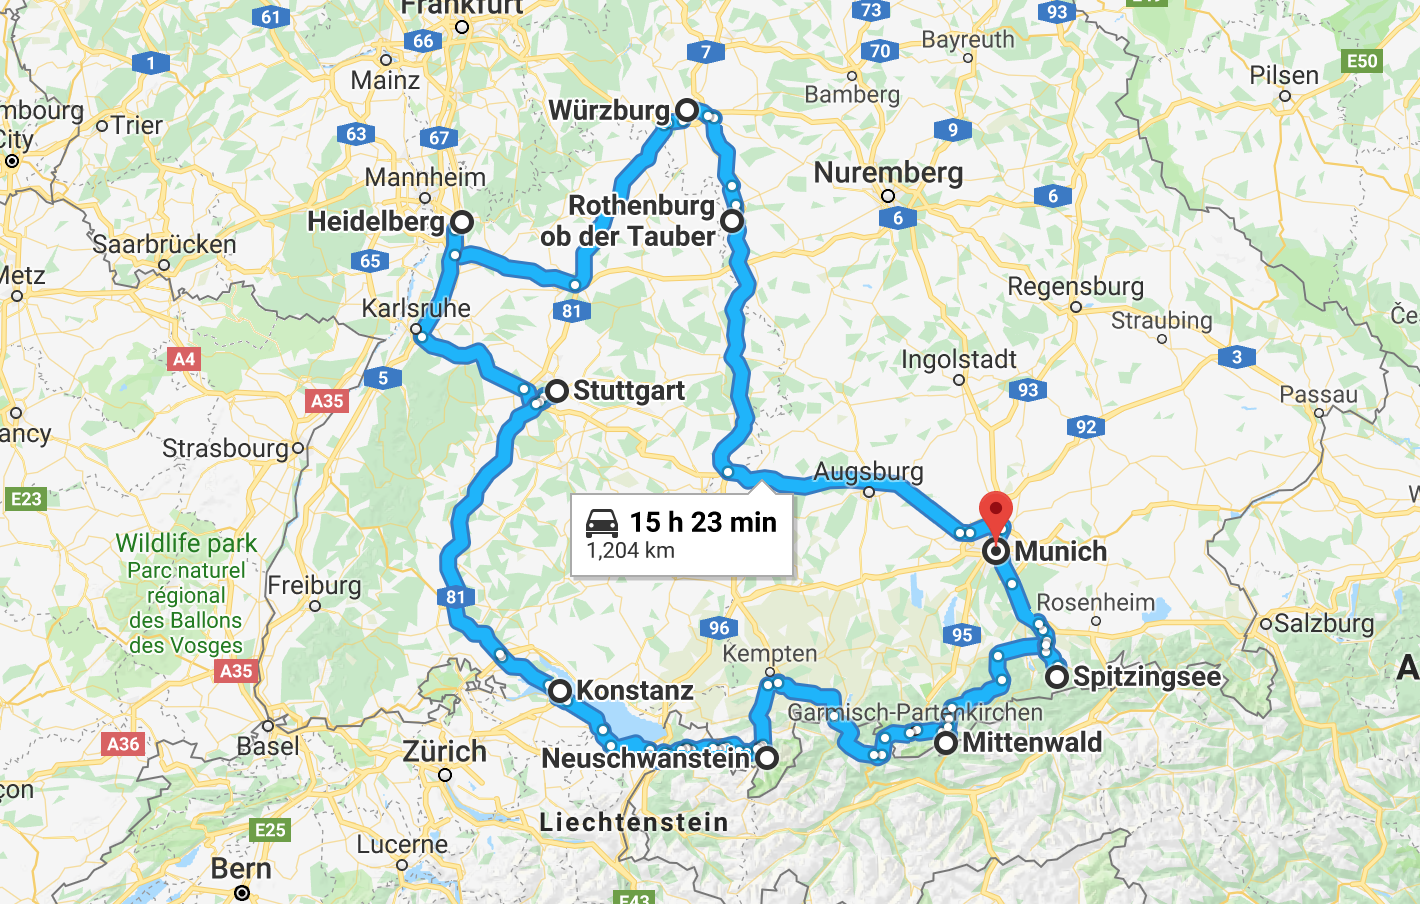 southern germany and austria trip planner map